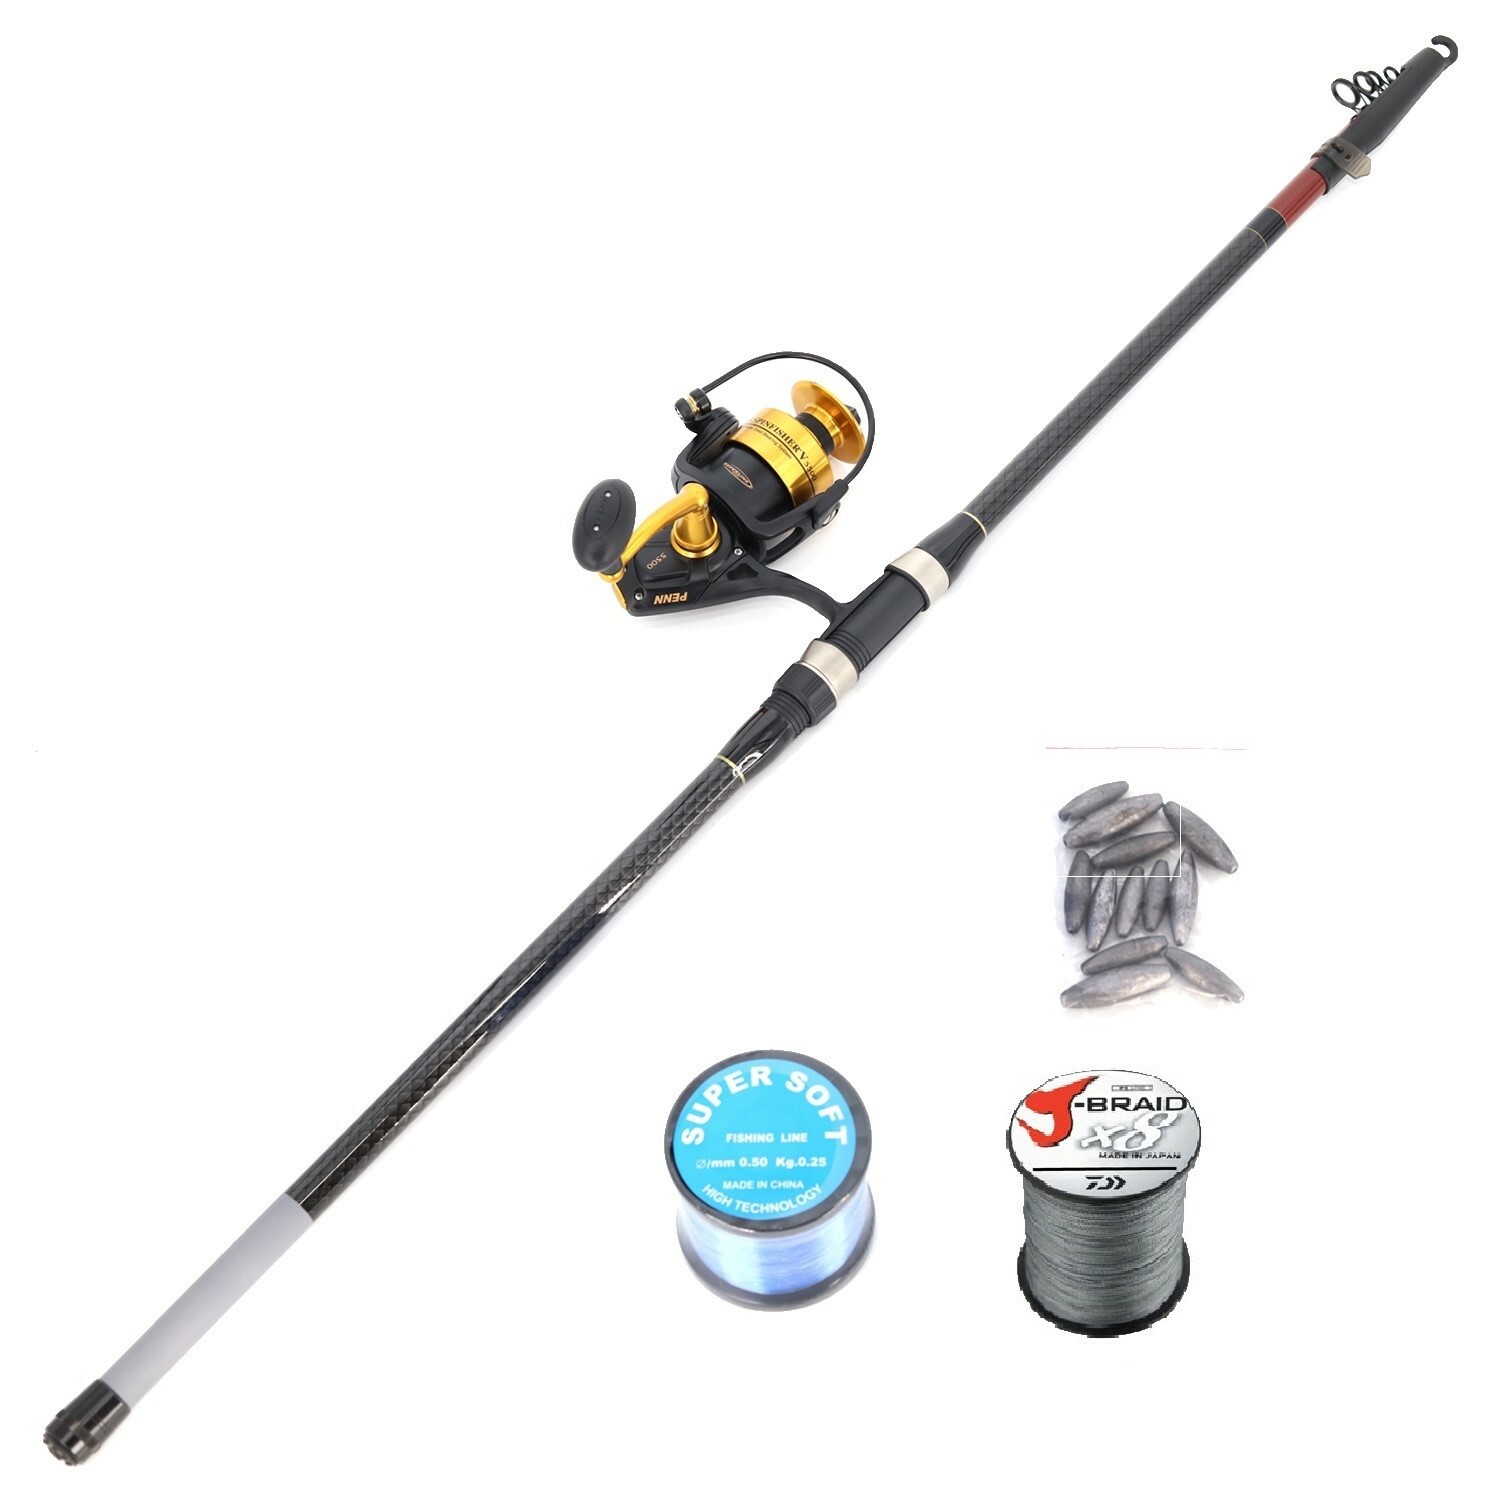 Shore Fishing (Pilot 3m and Penn V5500 including braid and mono line with rigs and sinkers) Combo